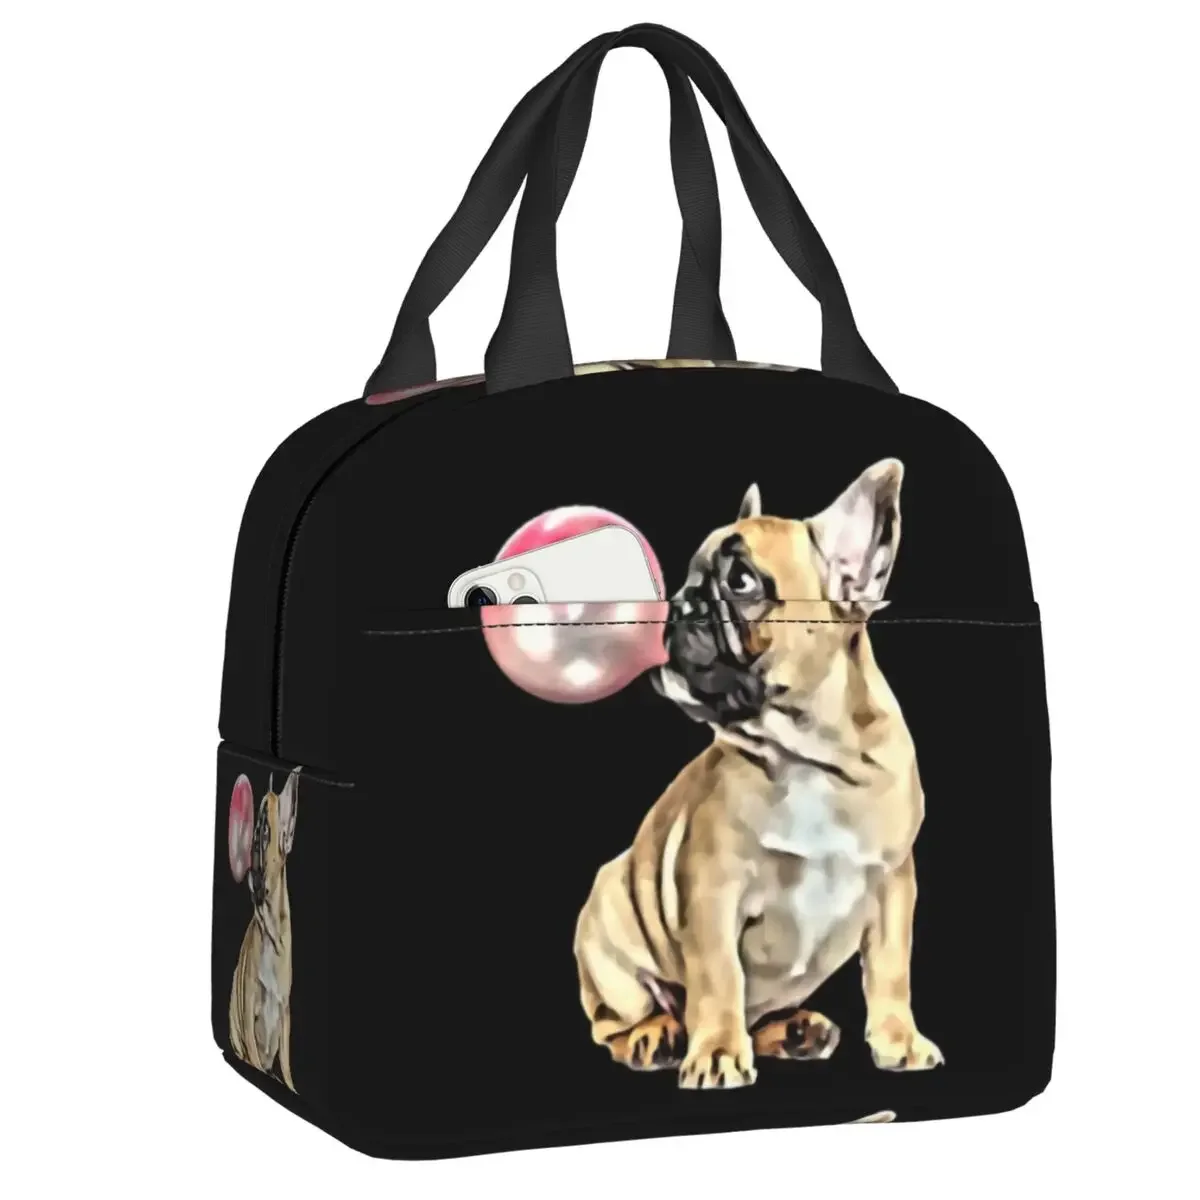 

French Bulldog Bubblegum Insulated Lunch Bag for Women Resuable Cooler Thermal Food Lunch Box Work School Travel Picnic Tote